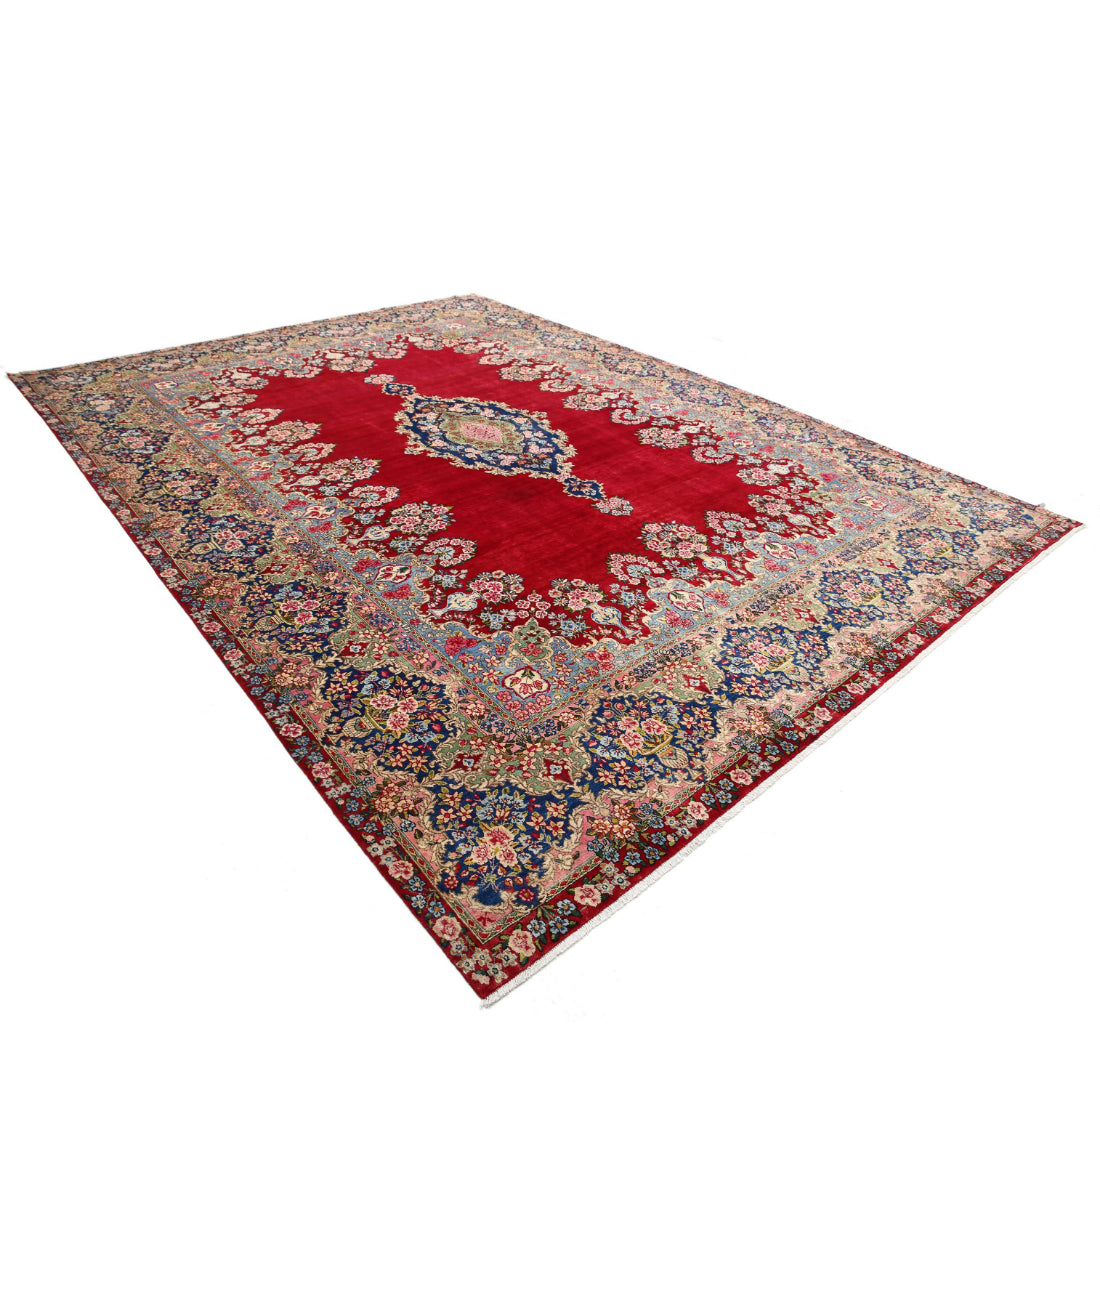 Hand Knotted Persian Kerman Wool Rug - 9'11'' x 13'9'' 9'11'' x 13'9'' (298 X 413) / Red / Blue